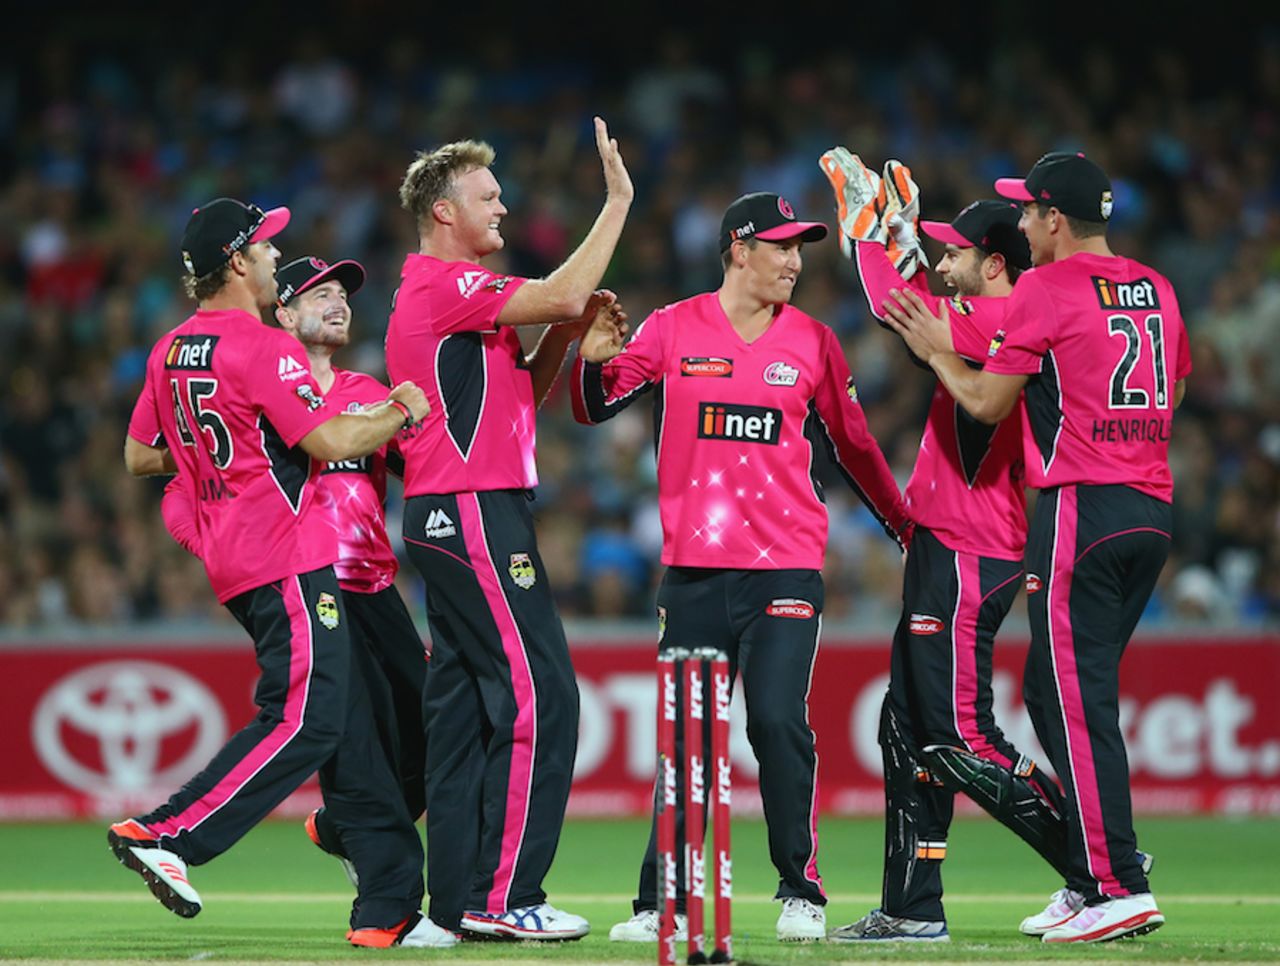 Doug Bollinger finished with 3 for 21, Adelaide Strikers v Sydney Sixers, BBL 2014-15, semi-final, Adelaide, January 24, 2015